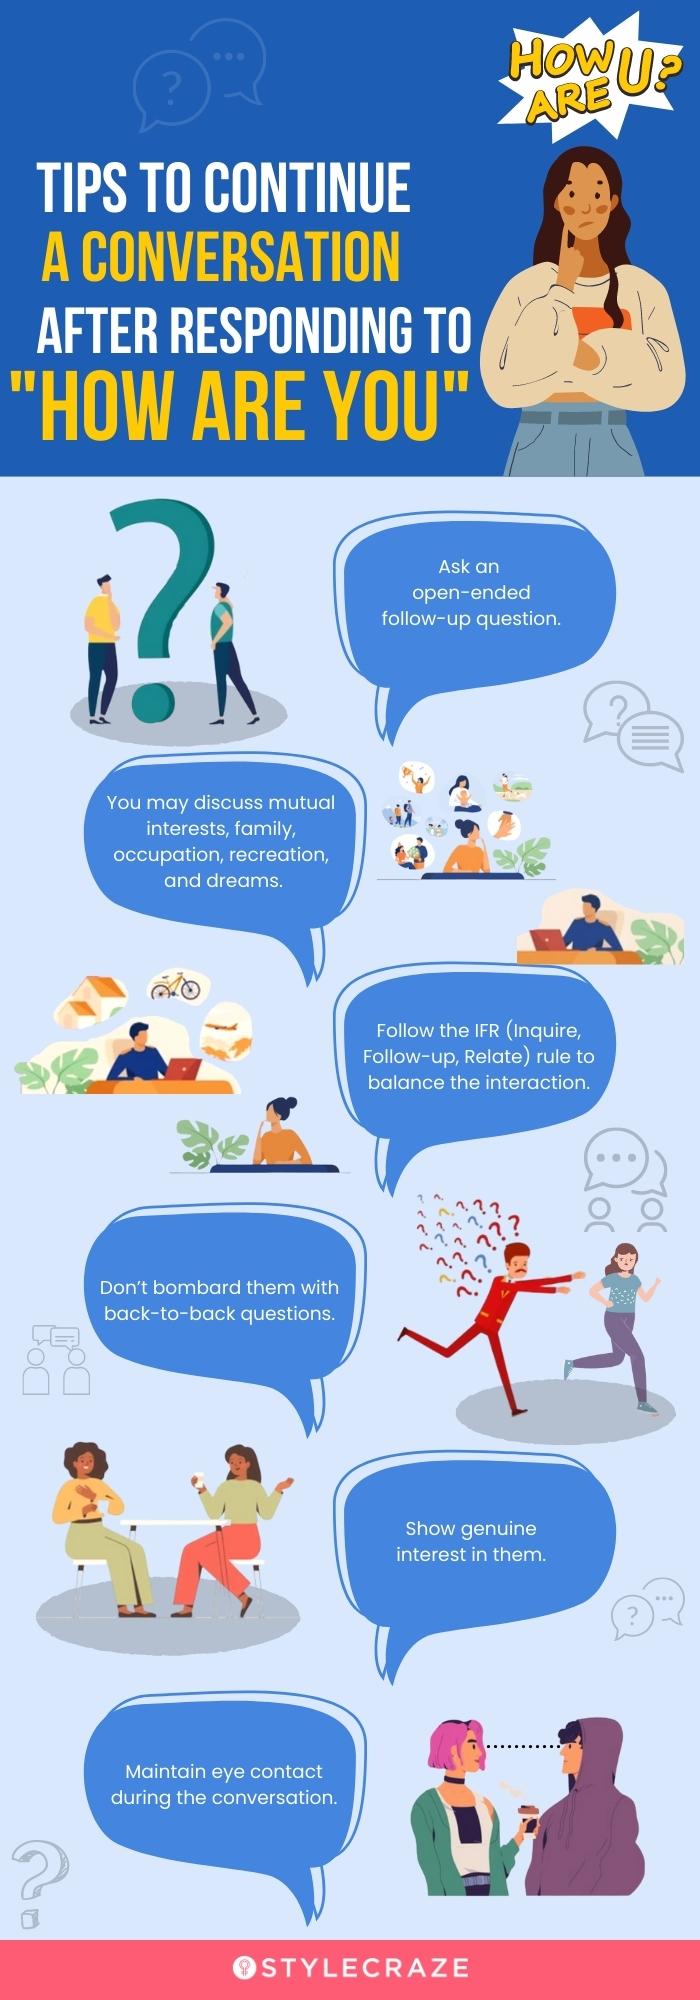 tips to continue a conversation after responding how are you [infographic]